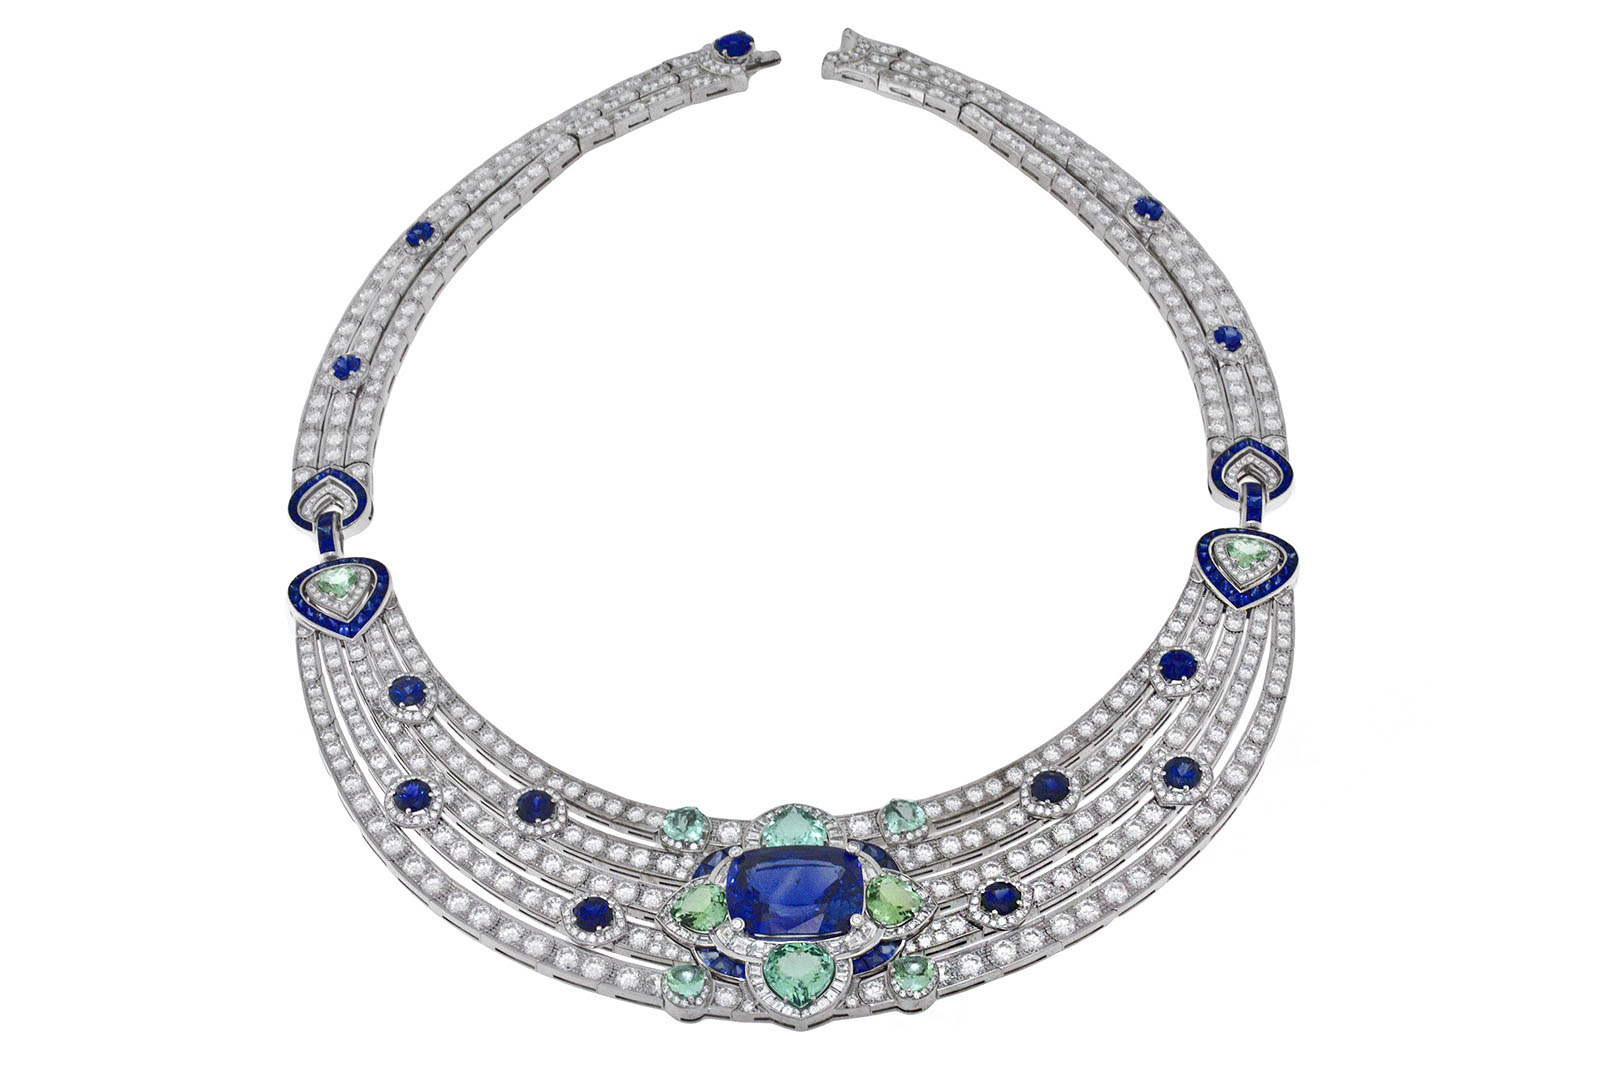 Bvlgari ‘Queen of Pop’ necklace from ‘Roaring 80s’ line with 24.82ct cushion cut Sri Lankan sapphire, sapphires, tourmalines and diamonds